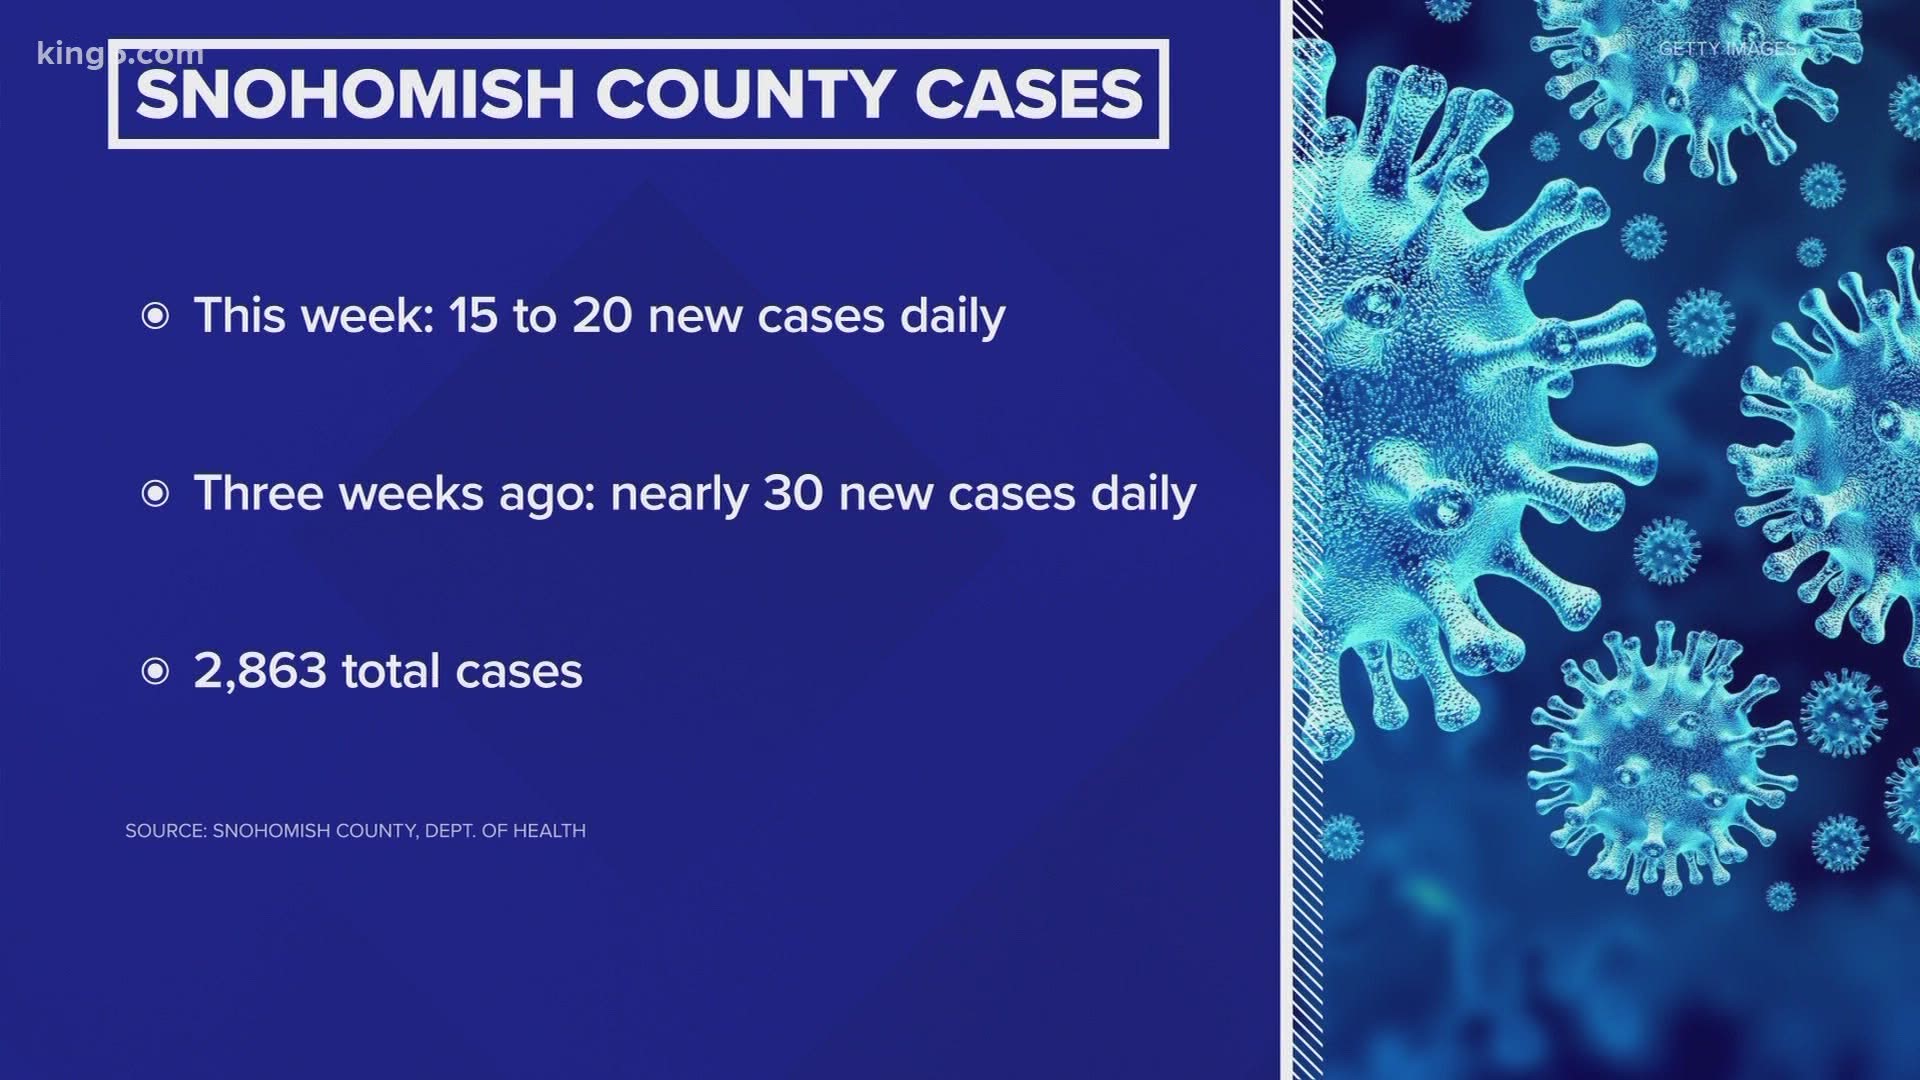 Health officials say Snohomish County doesn’t meet Phase 2 requirements for coronavirus activity, contact tracing and testing.